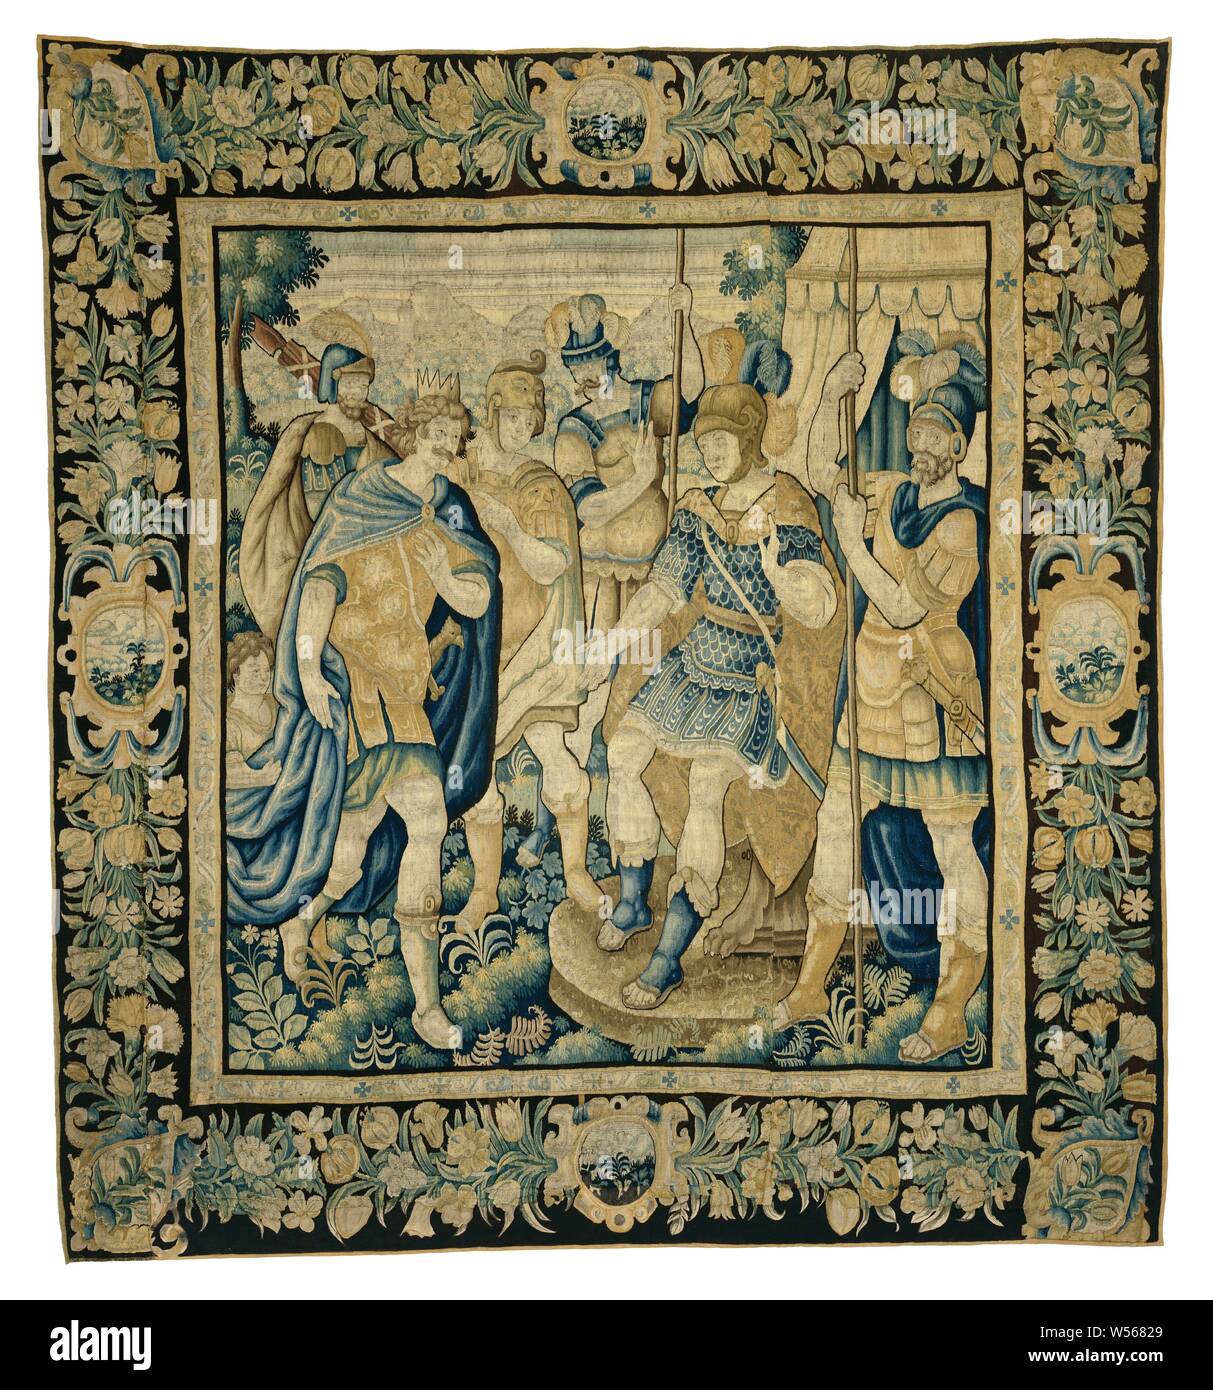 Alexander welcomes a king, The history of Alexander the Great (series title), Tapestry with king Porus (?) Visiting Alexander from a series with the history of Alexander the Great ., anonymous, Southern Netherlands, c. 1525 - c. 1650, ketting, inslag, tapestry, h 328.0 cm × w 307.0 cm Stock Photo